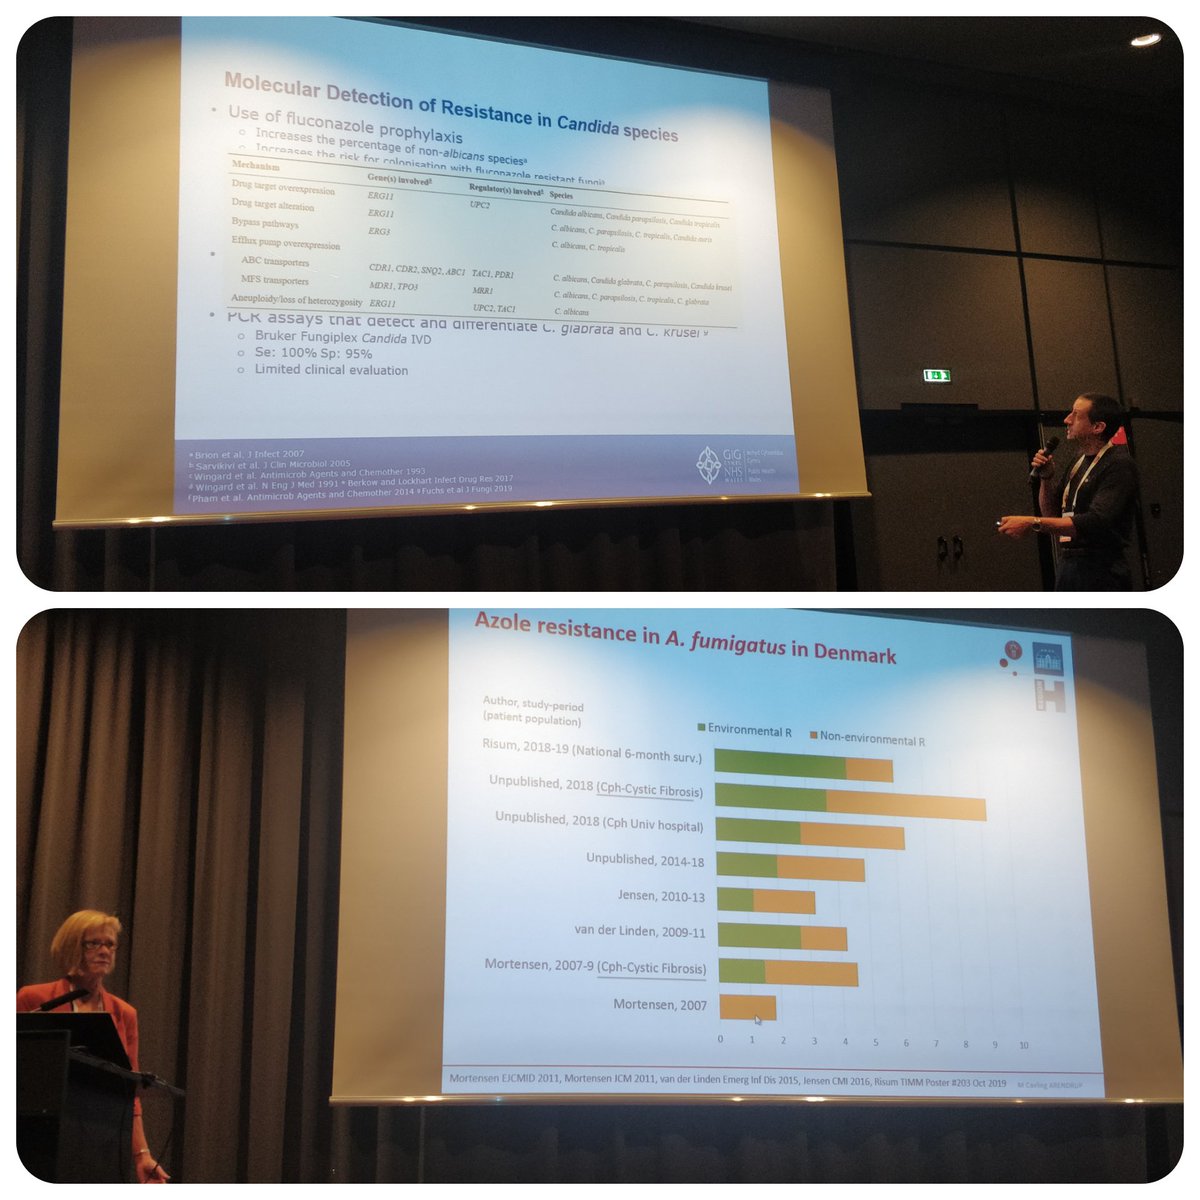 Antifungal drug resistance in 45 minutes! Inherent and acquired, susceptibility testing and molecular detection. Fantastic talks by inspiring leaders Lewis White and Maiken Arendrup. Available on pdf for delegates.
#TIMM2019 #antifungalresistance @TIMM_cc